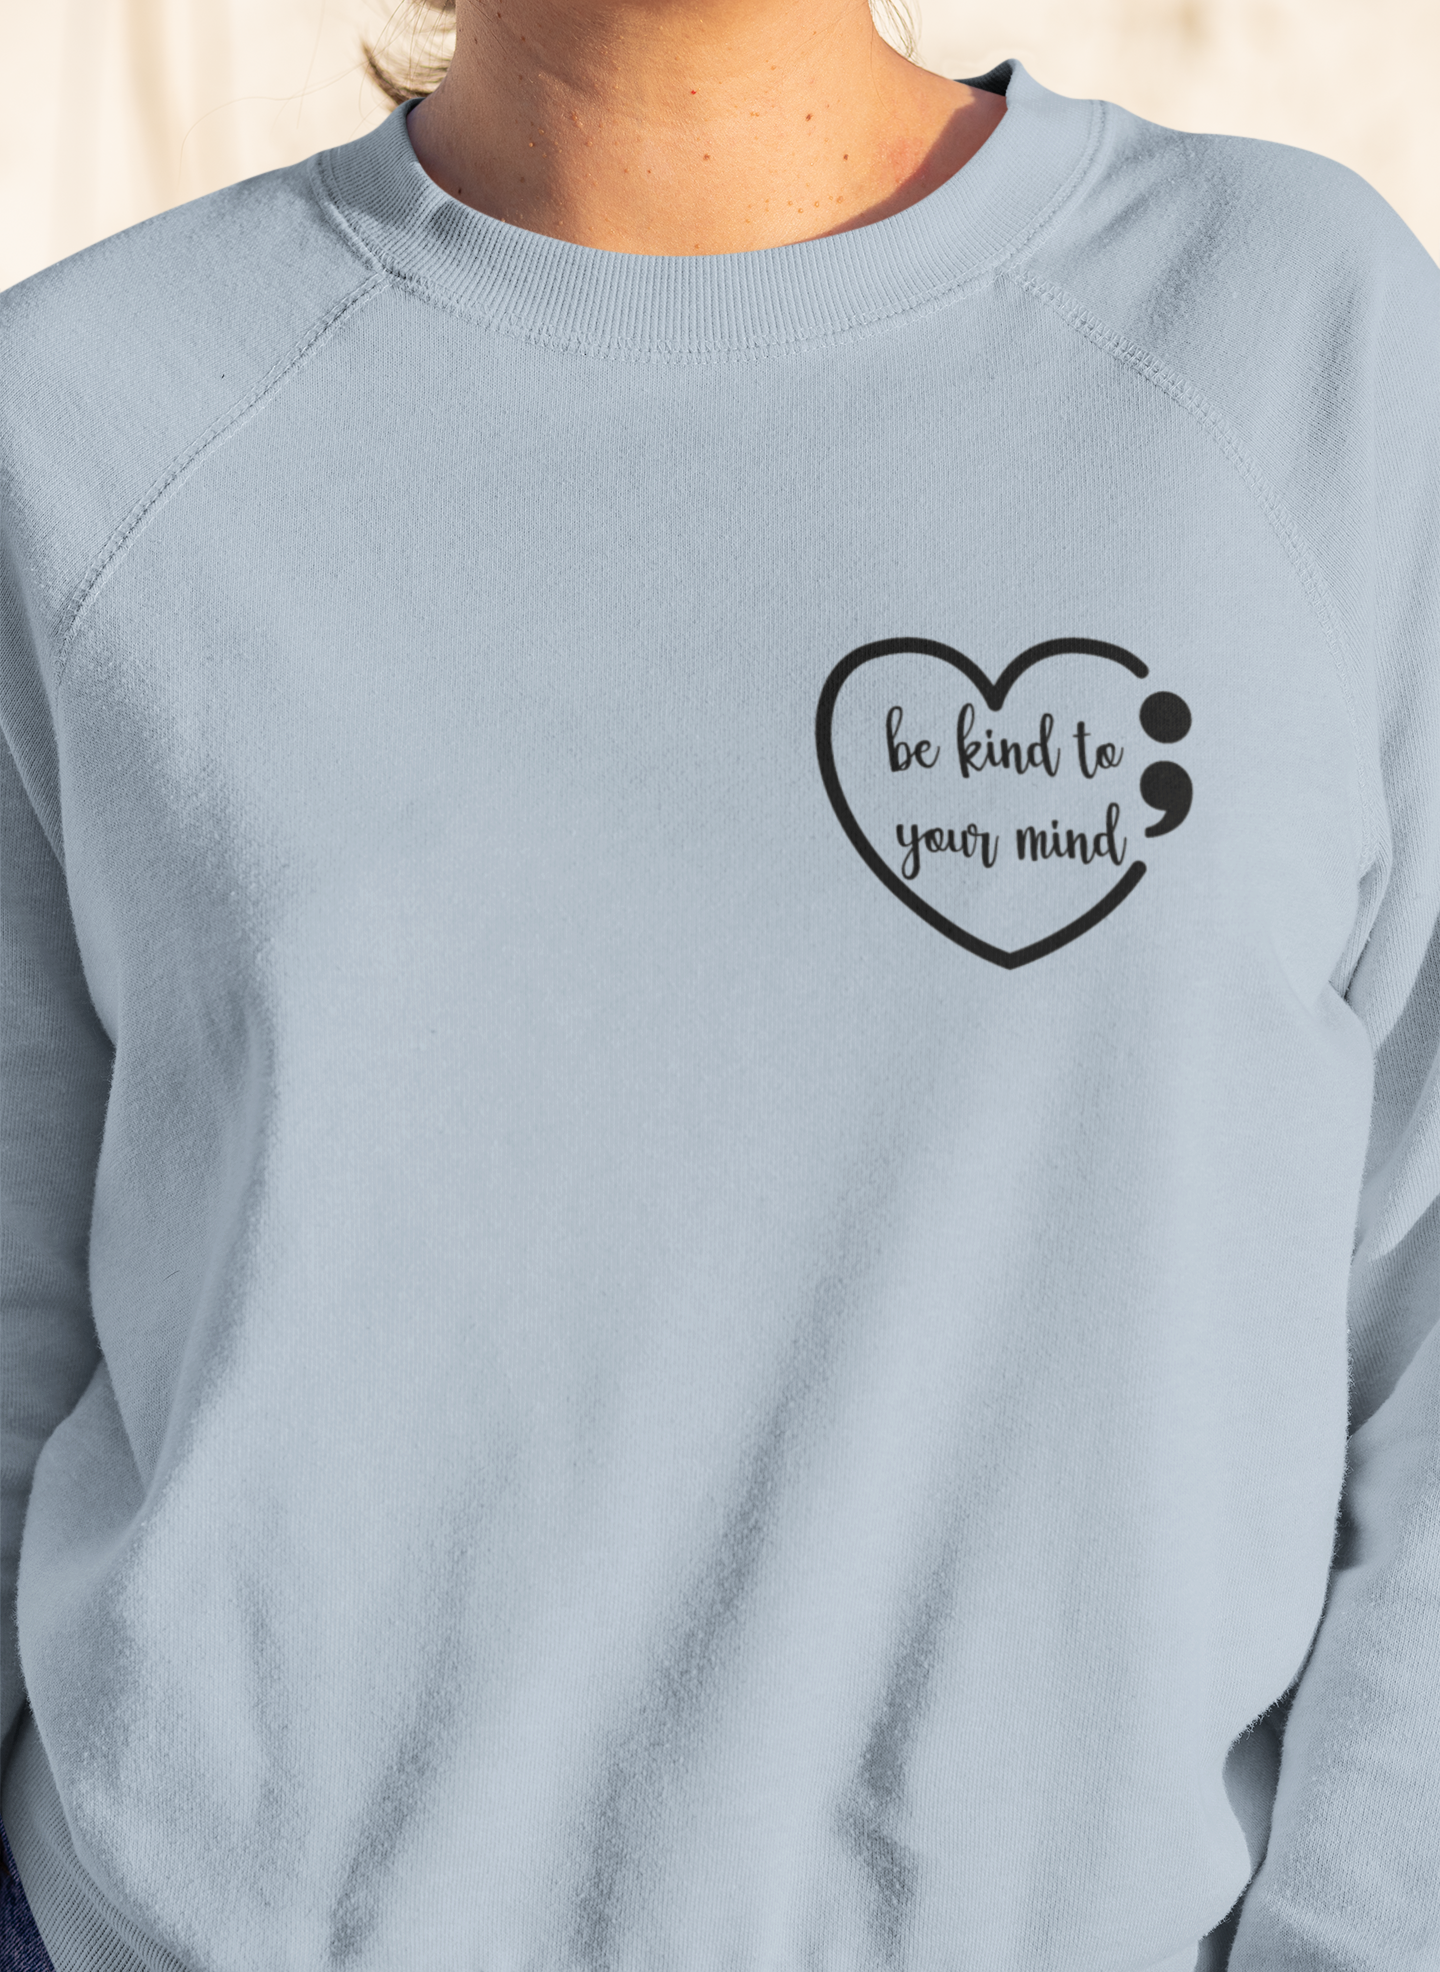 Dear Person Behind Me - Pull Over Sweatshirt in light blue. Designs are in black. The back says "Dear person behind me, the world is a better place with you in it. Love the person in front of you" in a cursive design. The front design is on the right hand side, as a small pocket square with the saying "be kind to your mind" in cursive with a heart and semi colon surrounding it. This is the front view of the sweatshirt on a model (up close view)